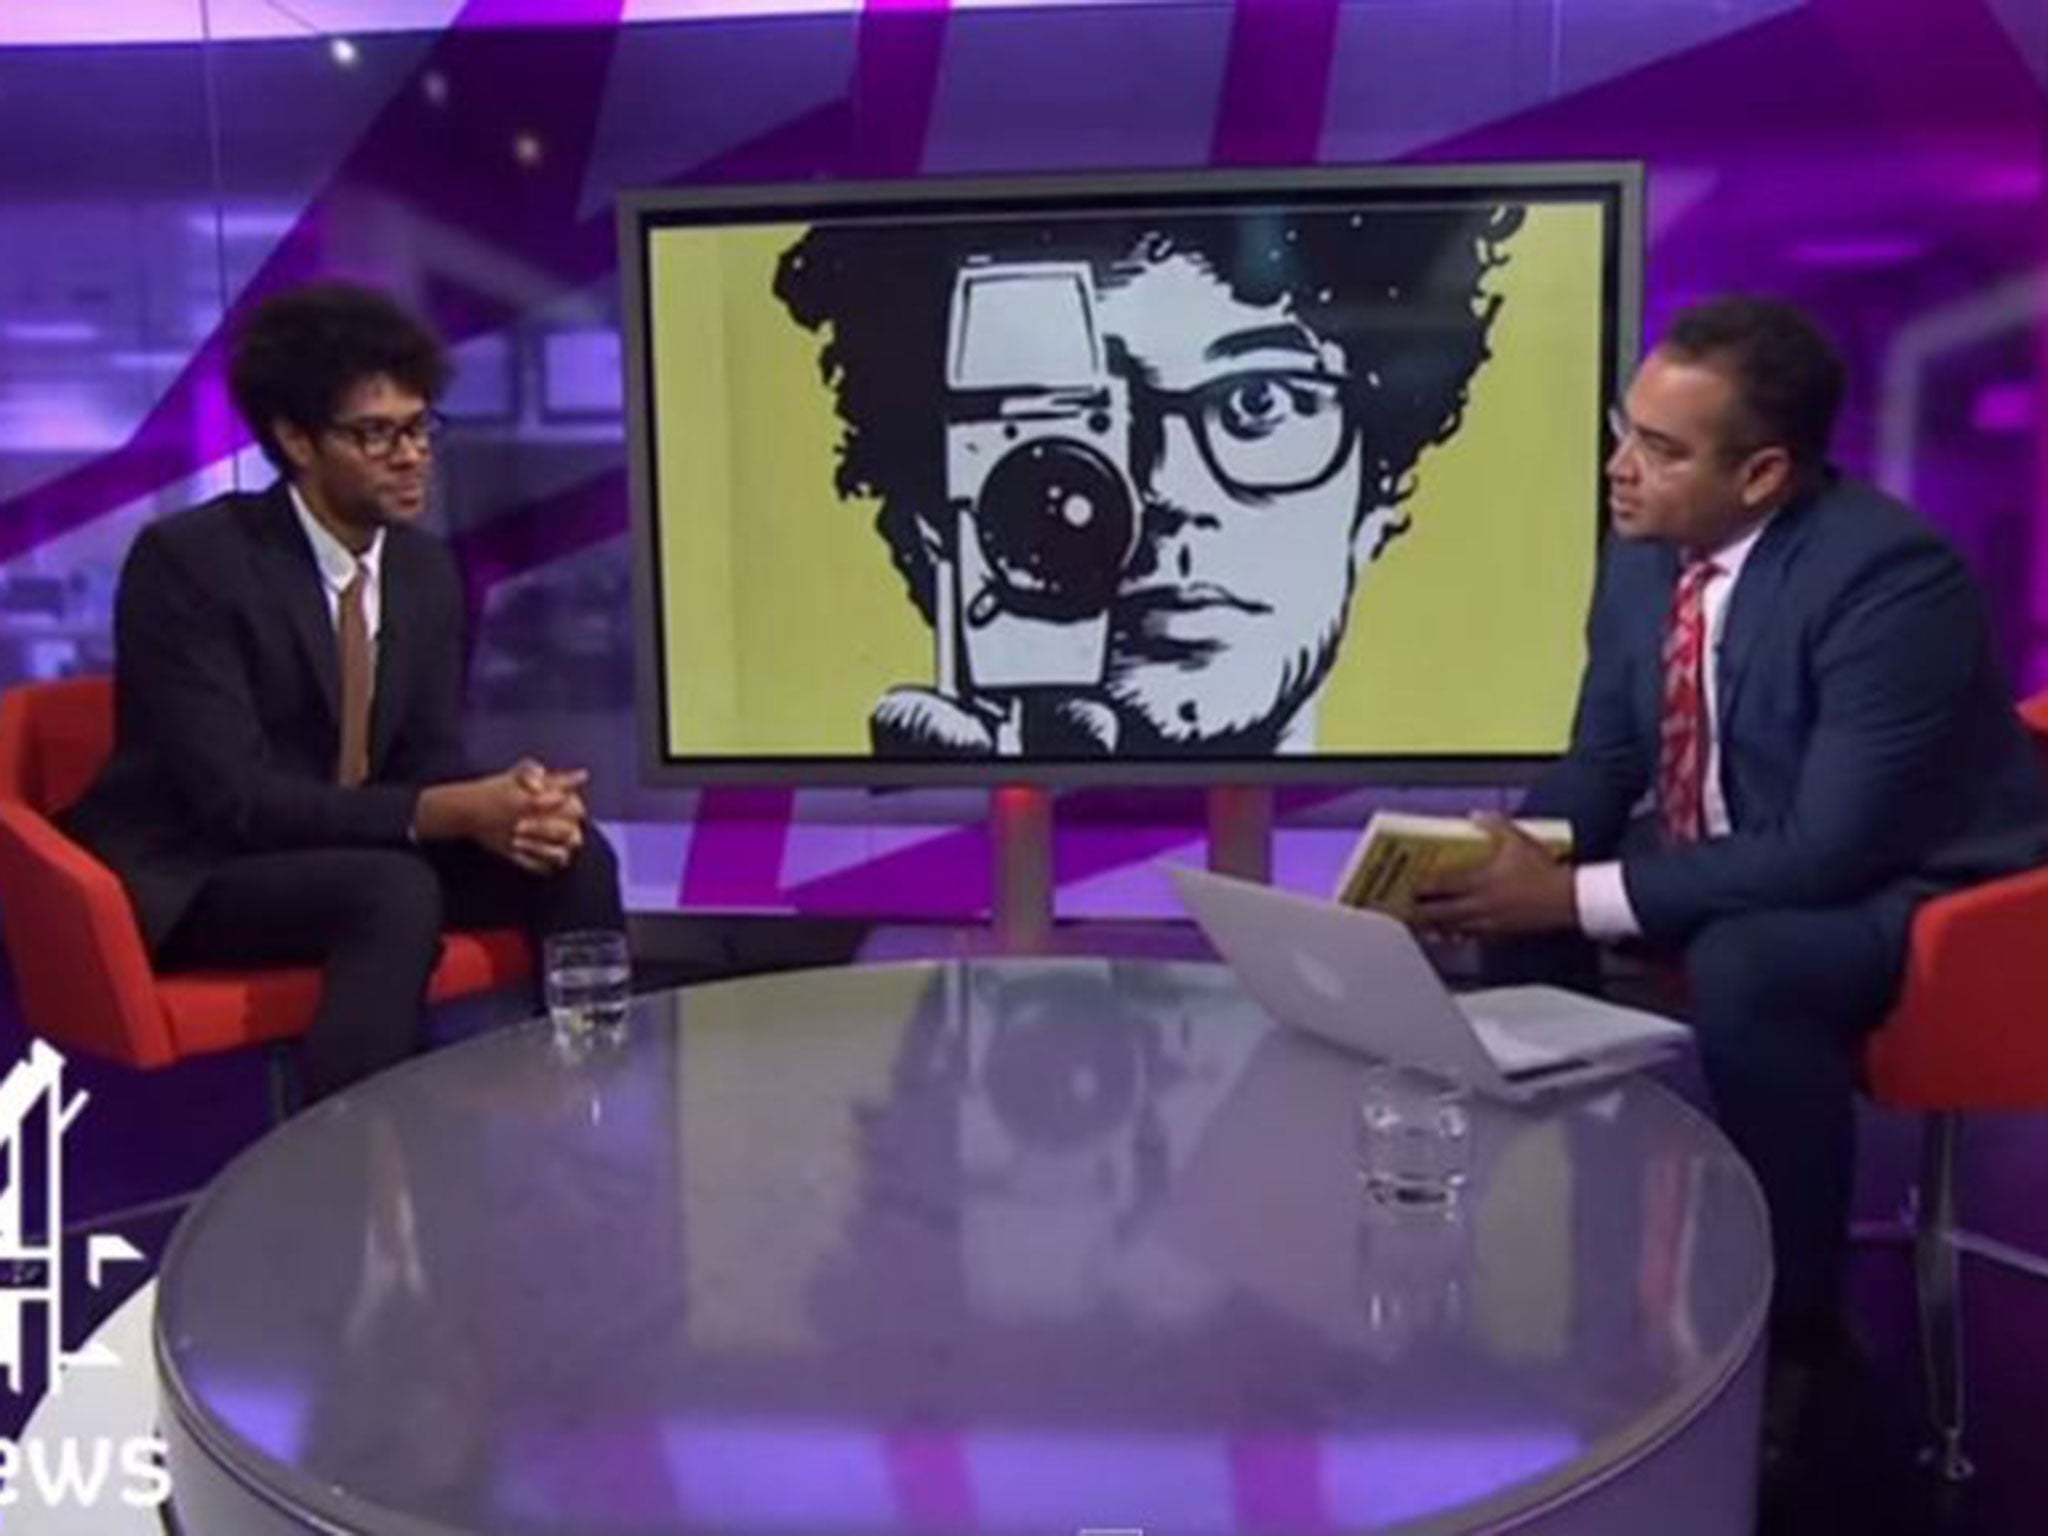 If interviewees such as Richard Ayoade, with Krishnan Guru-Murthy, don’t want to engage with the process, maybe they should stay at home